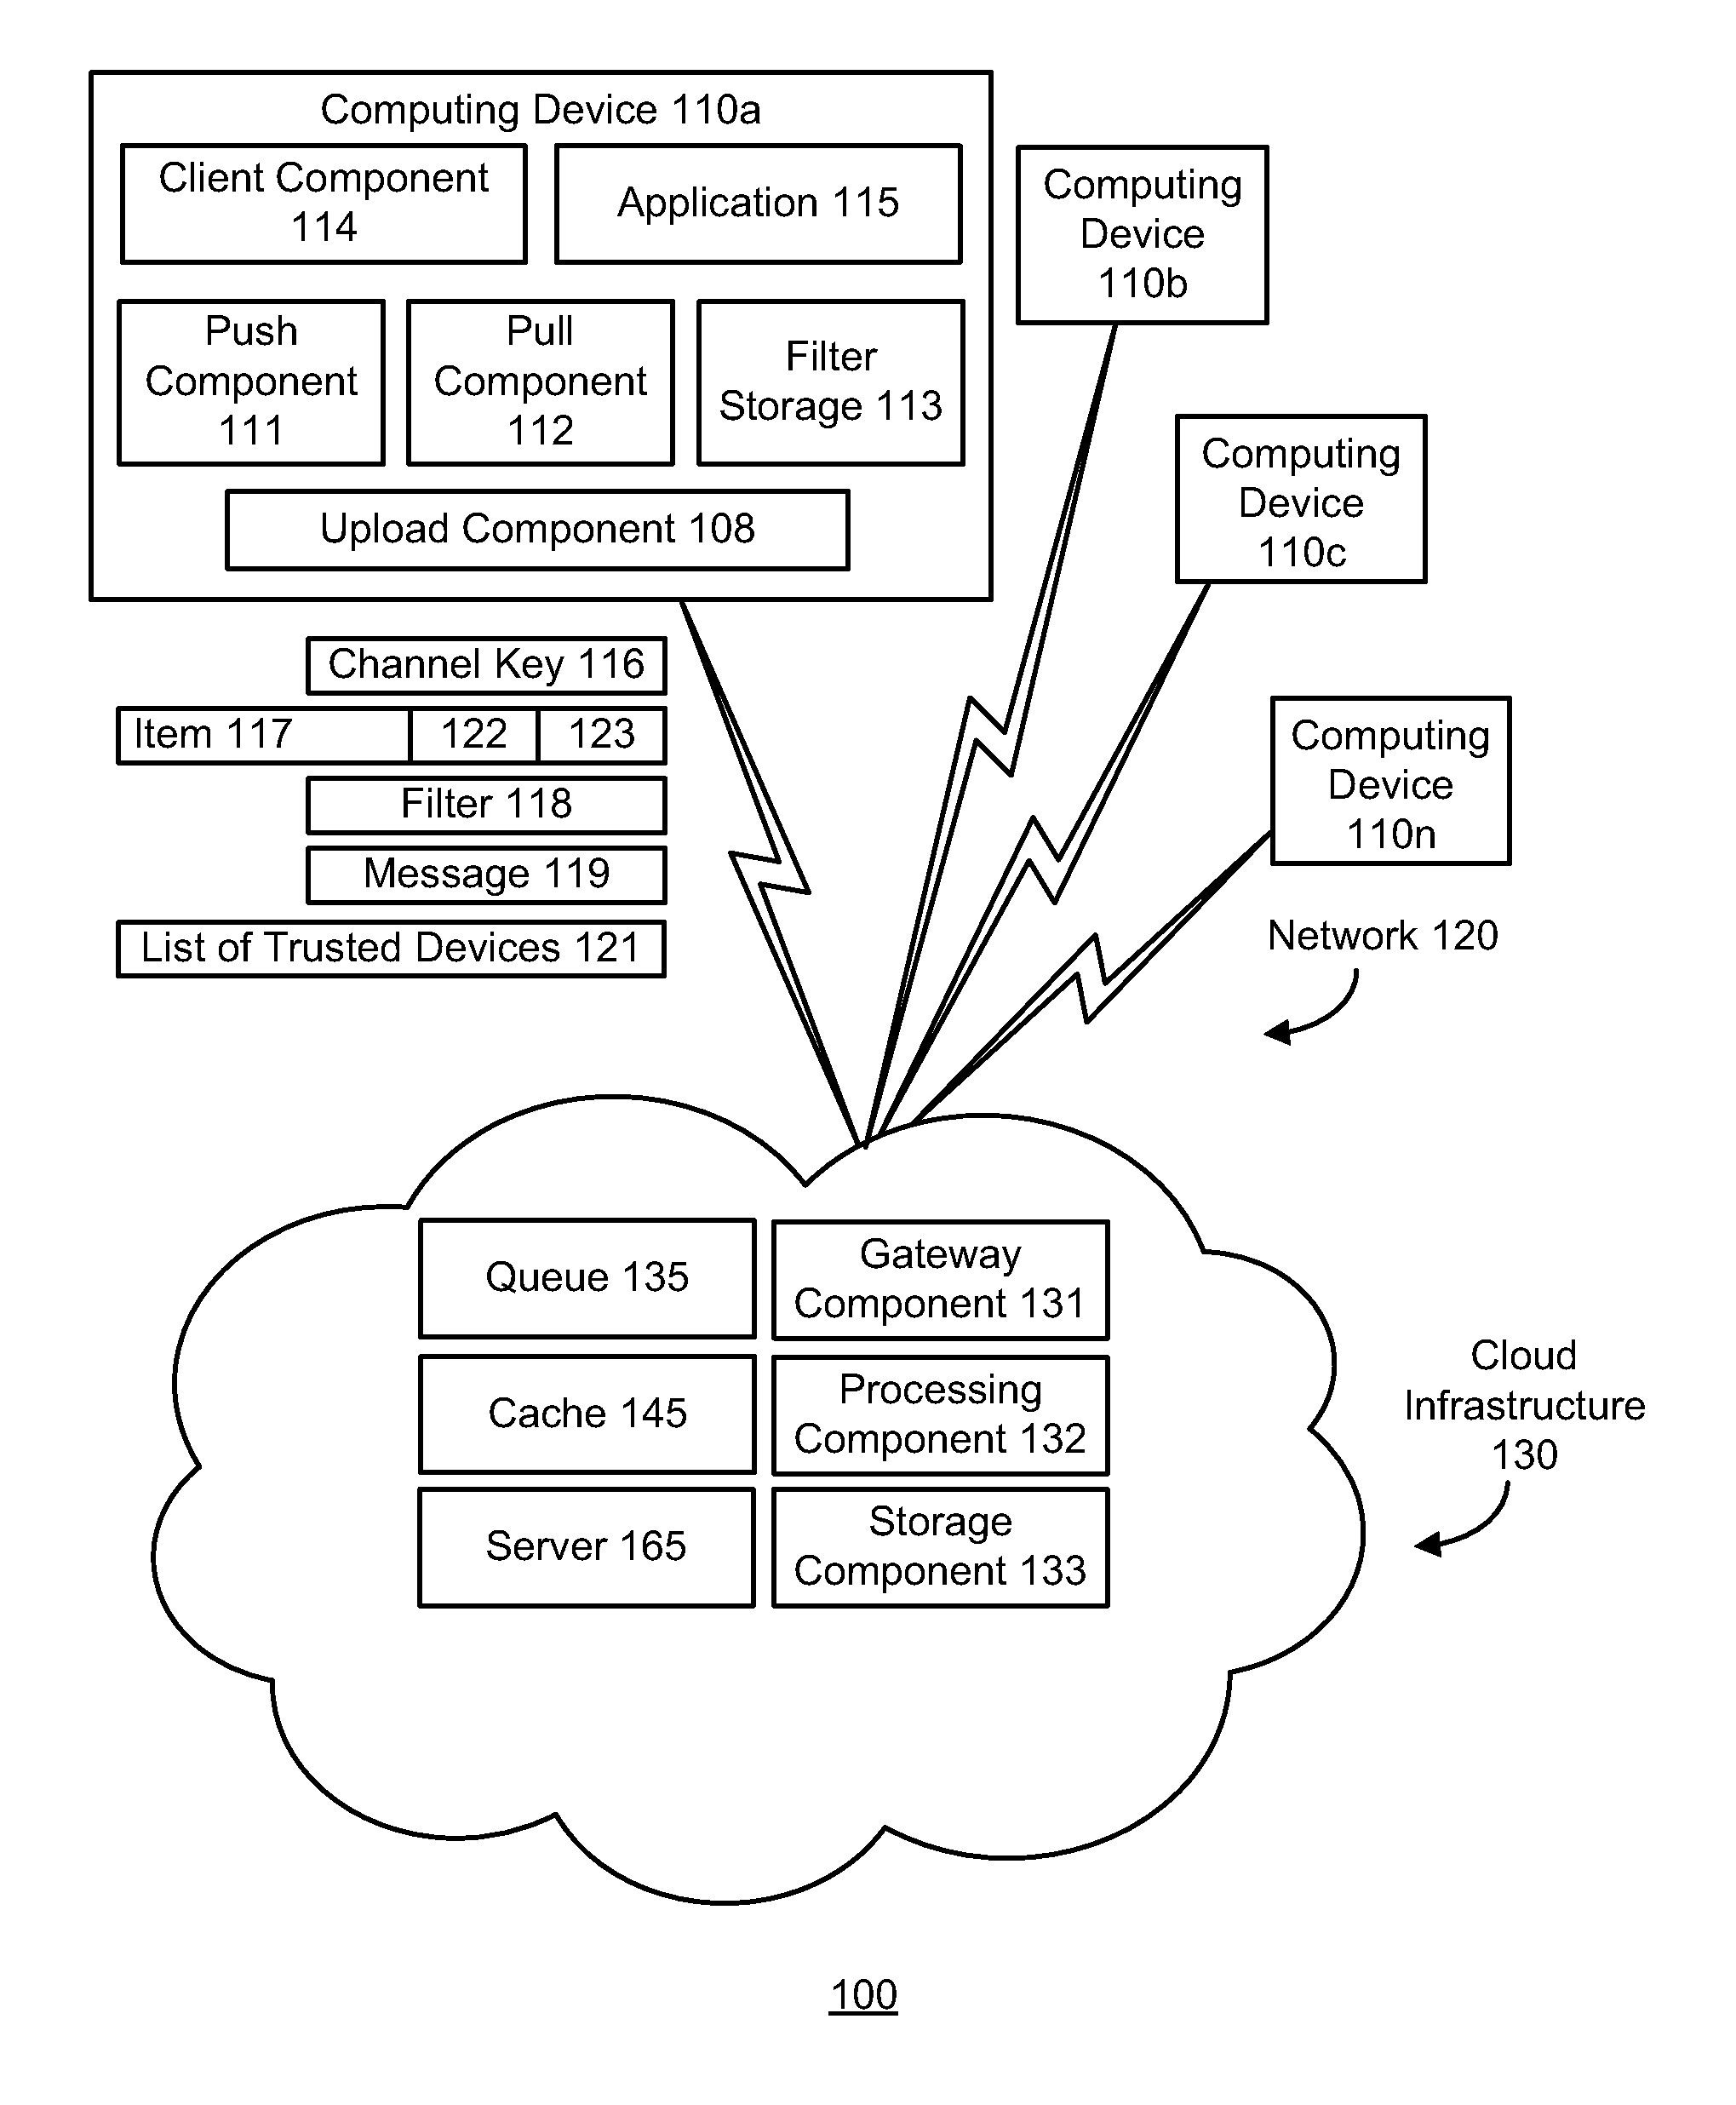 Communicating using a cloud infrastructure